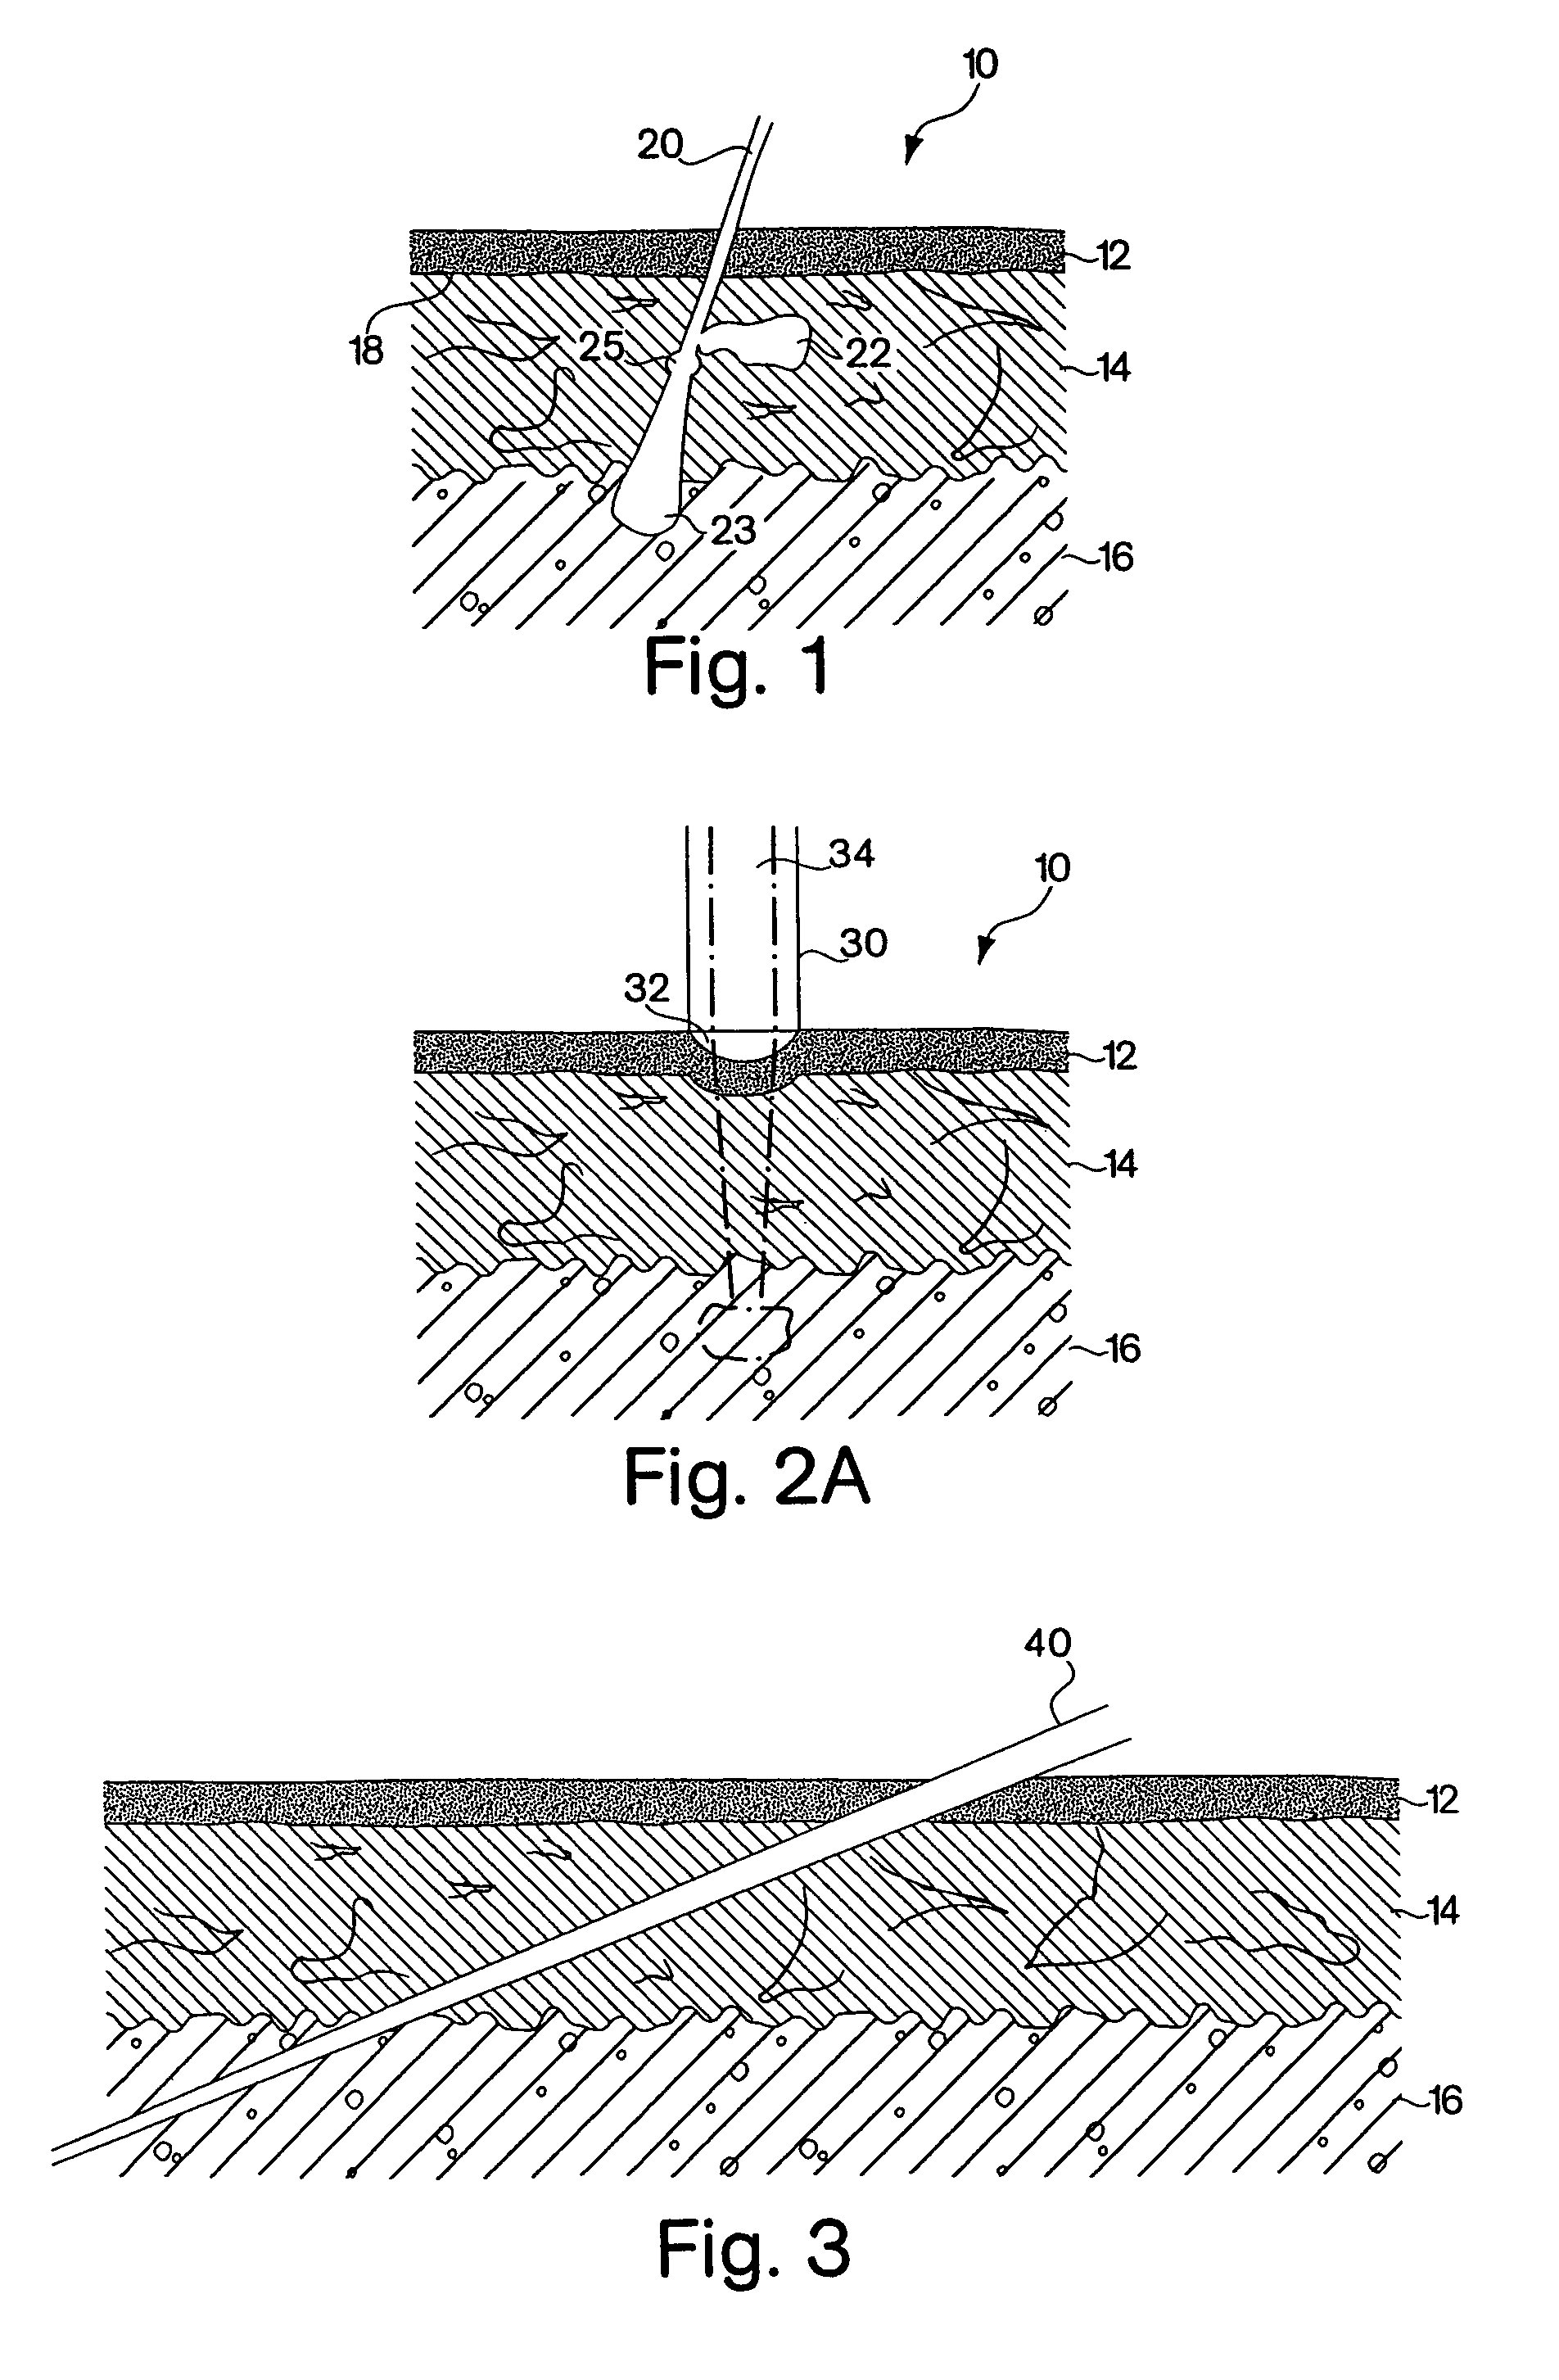 Method and apparatus for the selective targeting of lipid-rich tissues